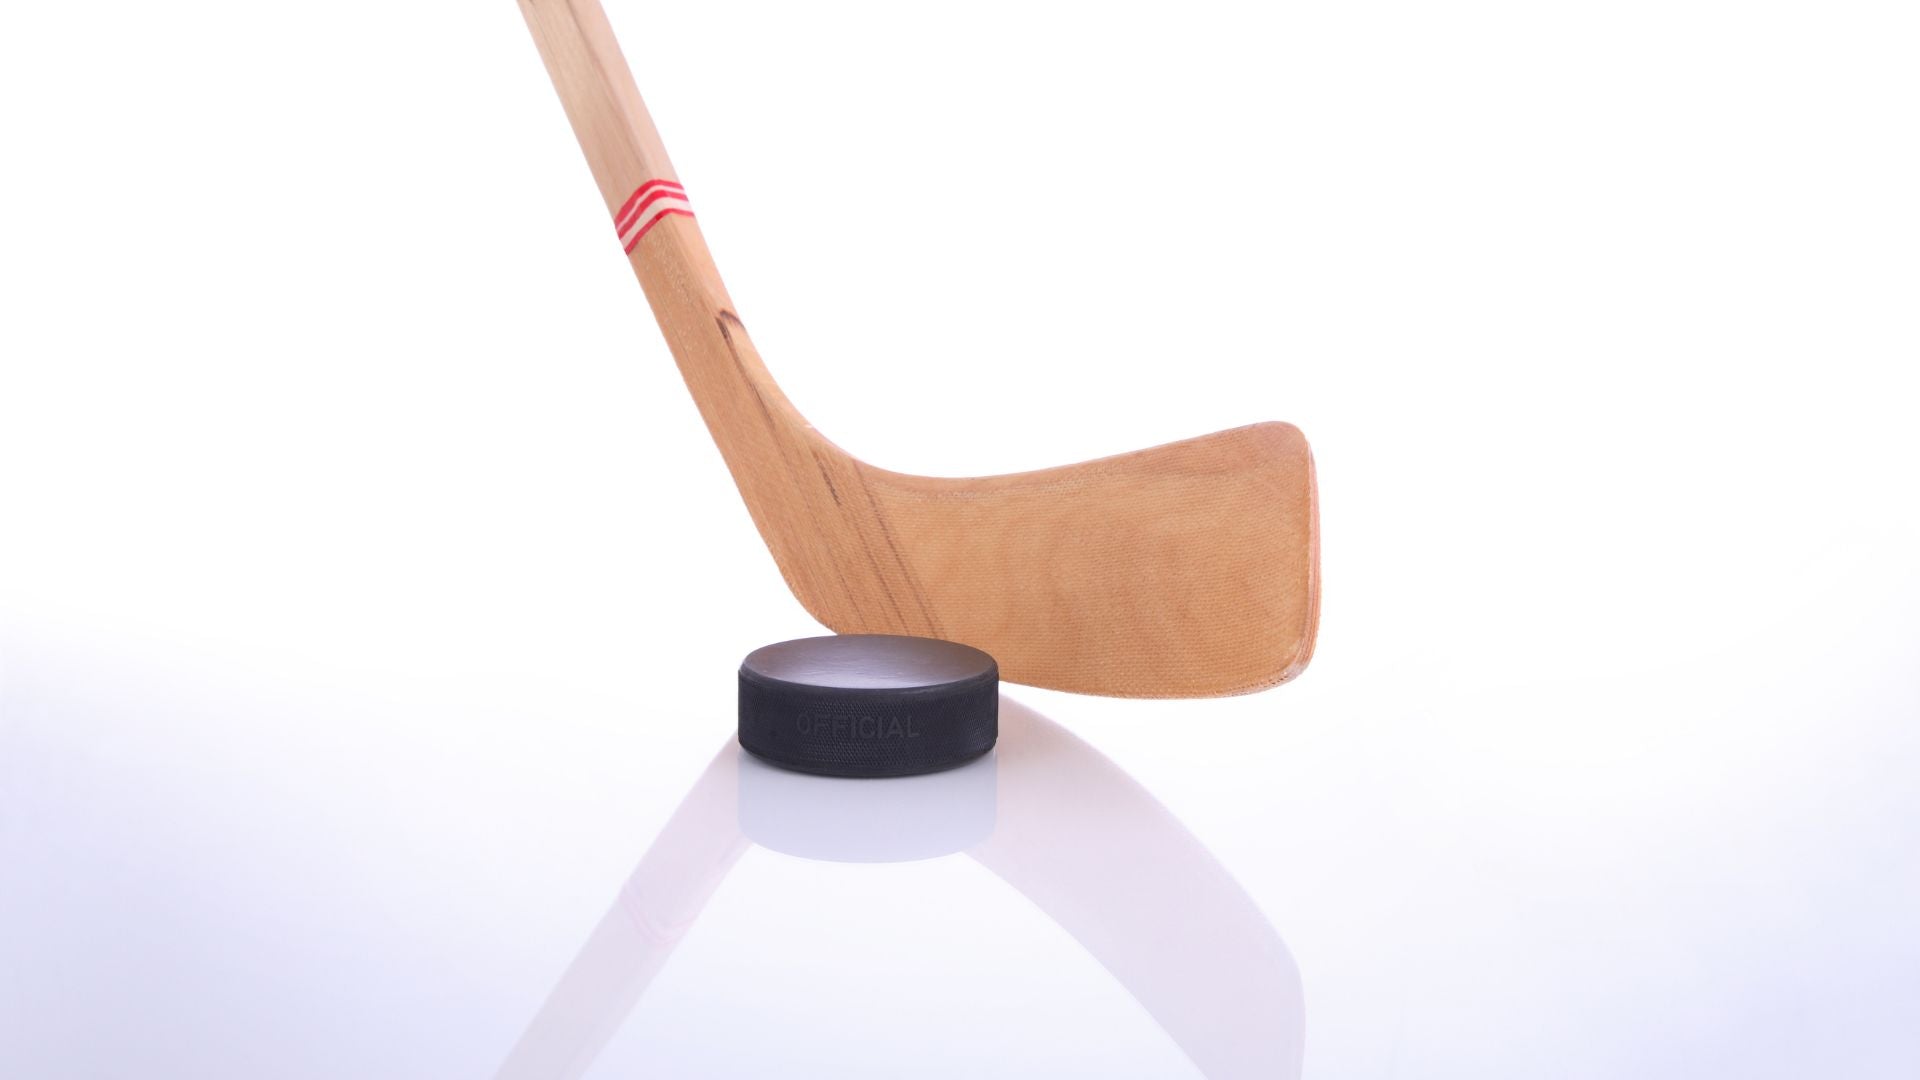 Wood You Believe It? Why Some Hockey Players Still Choose Wooden Sticks